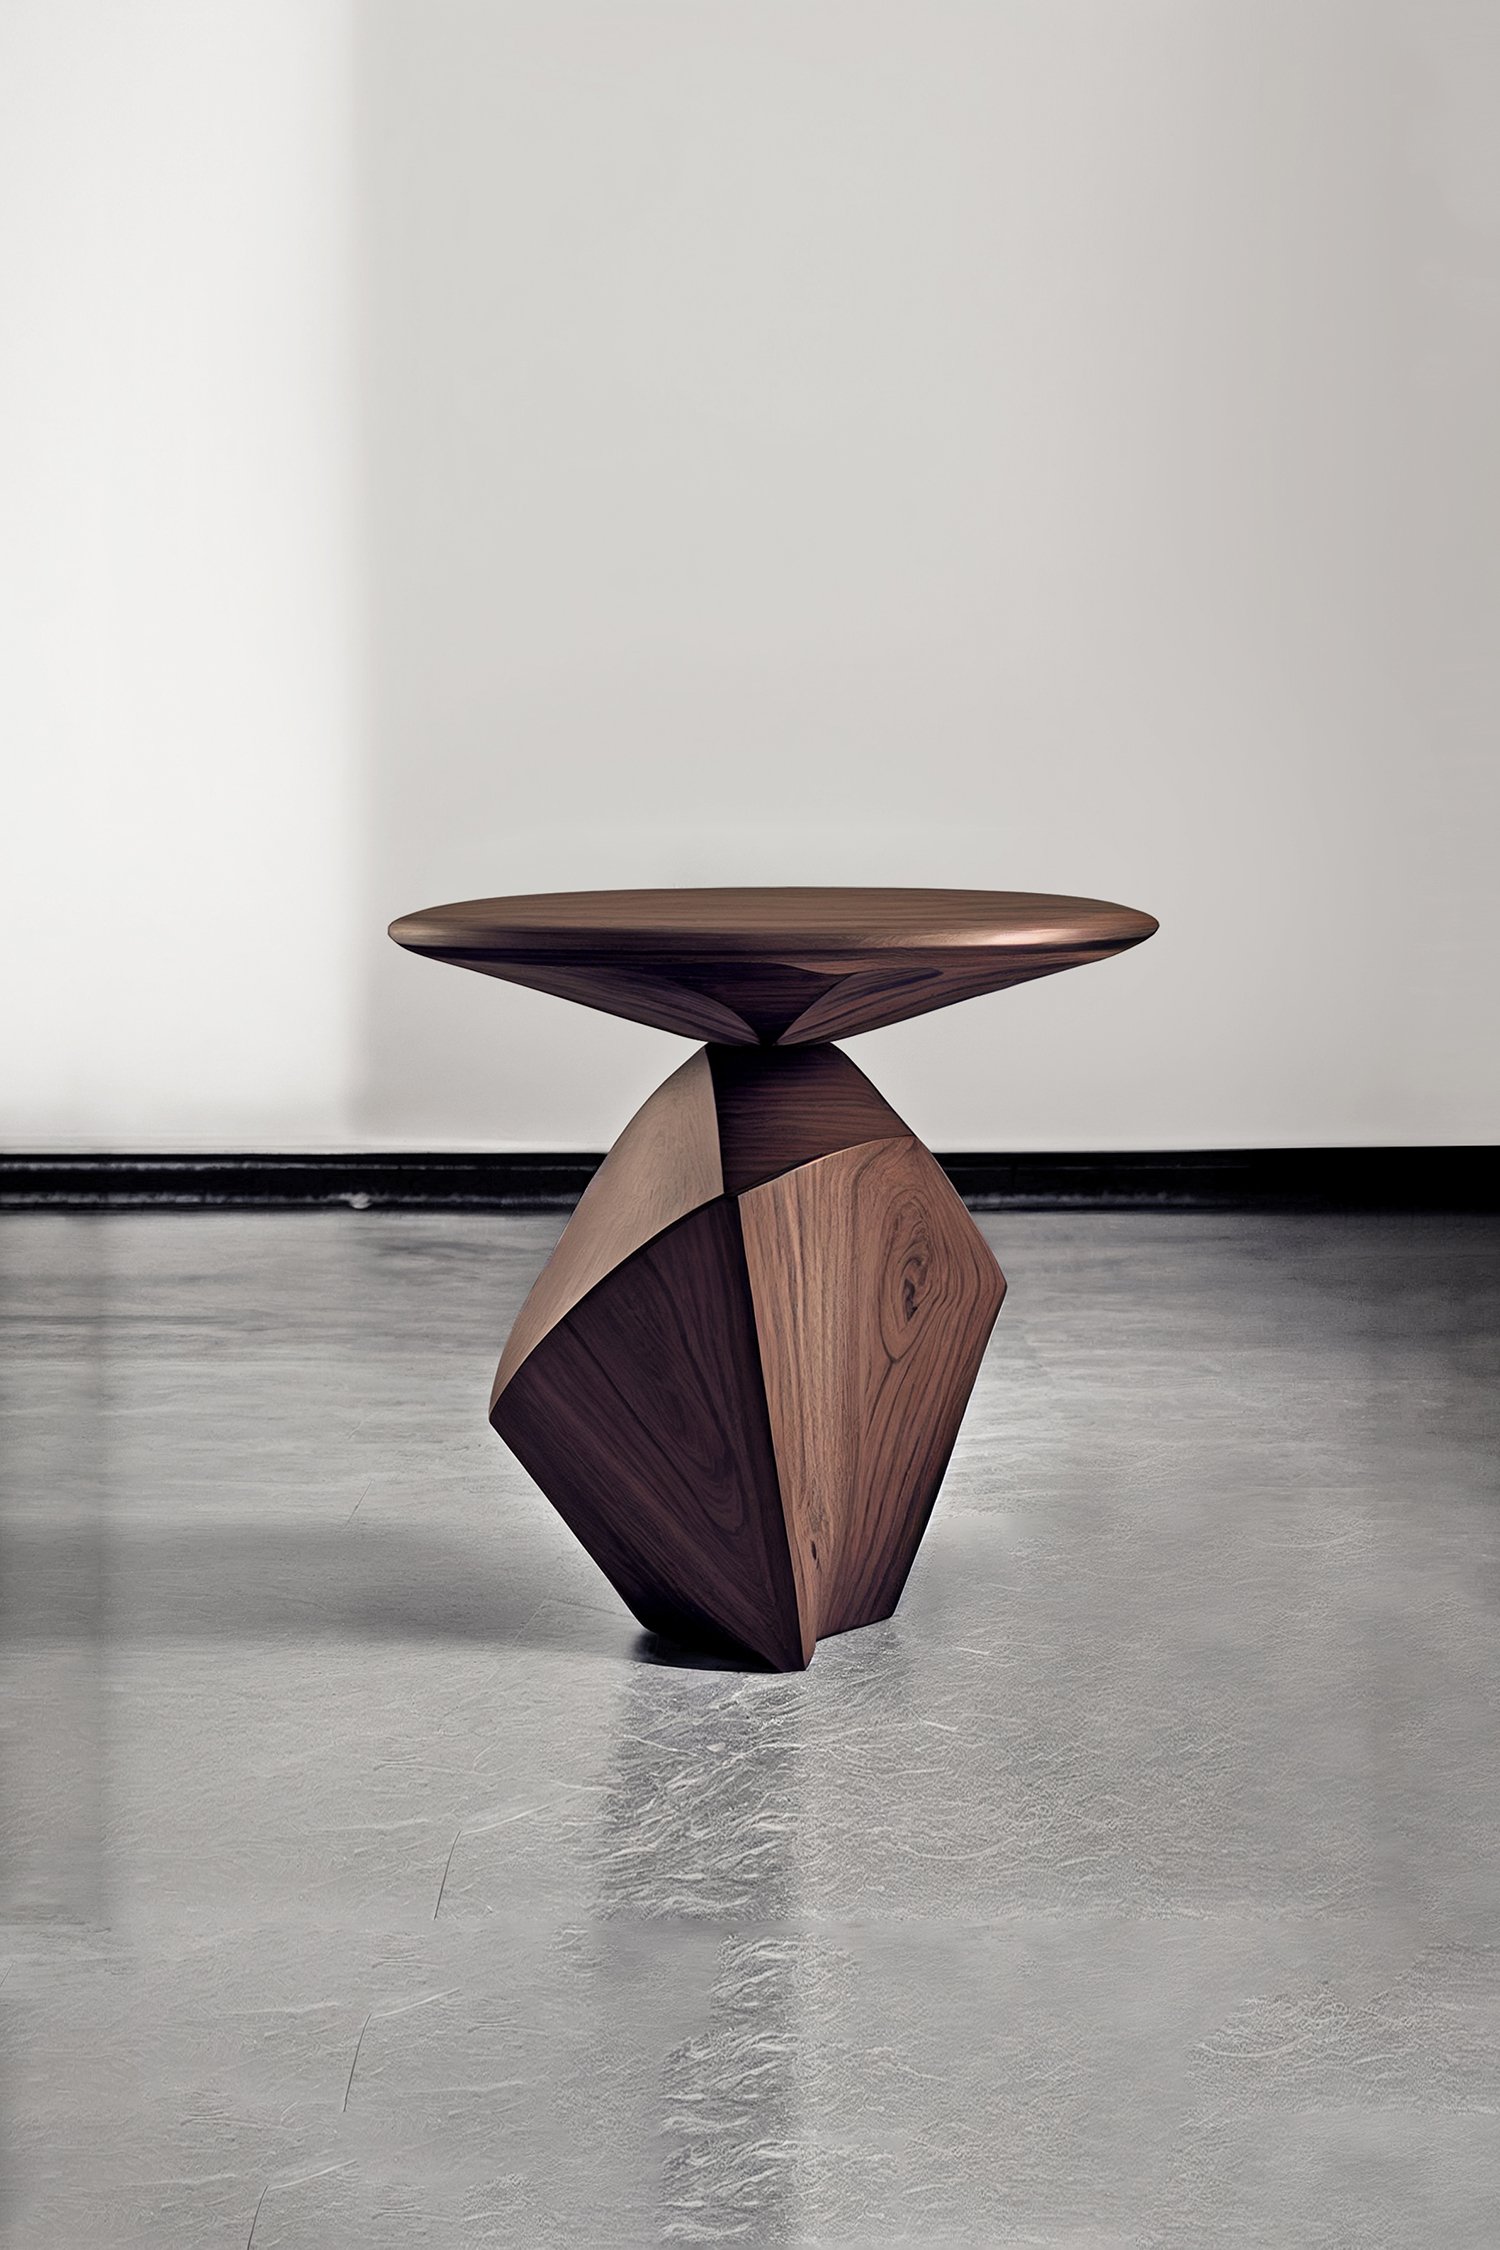 Sculptural Side Table Made of Solid Walnut Wood Solace S5 by Joel Escalona — 2.jpg